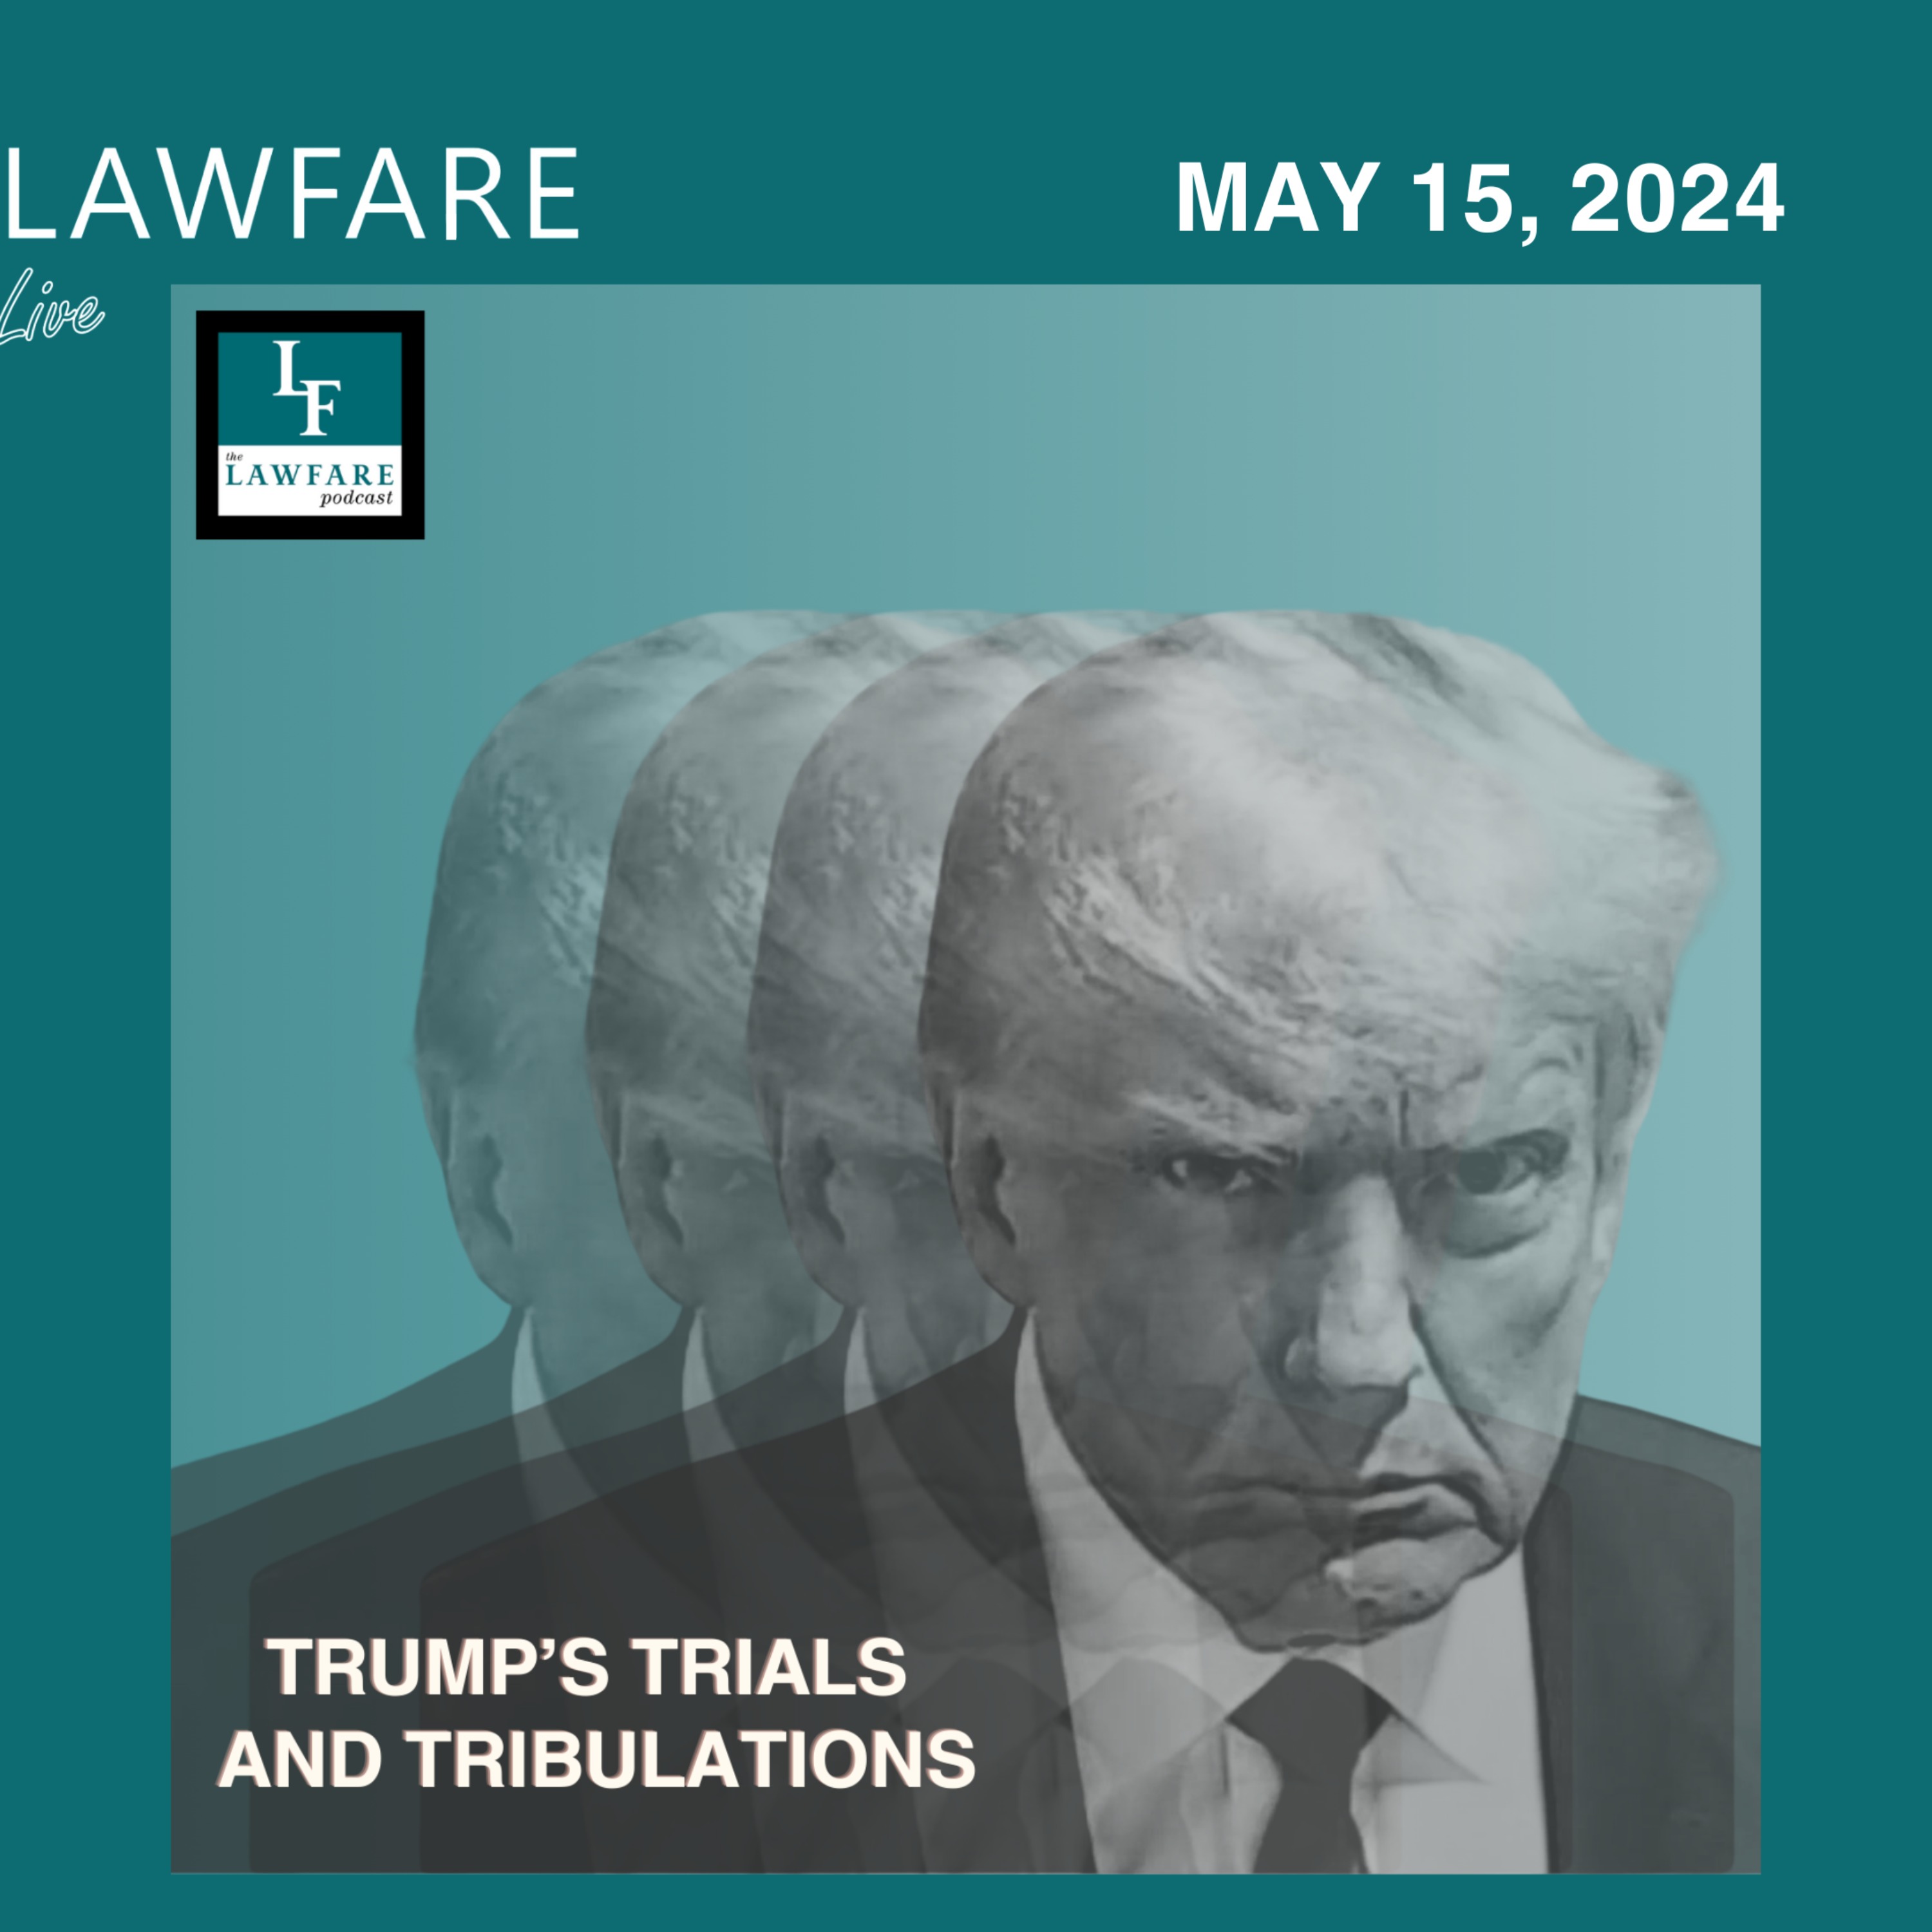 Lawfare Daily: Trump Trials and Tribulations Weekly Round-up (May 15, 2024)